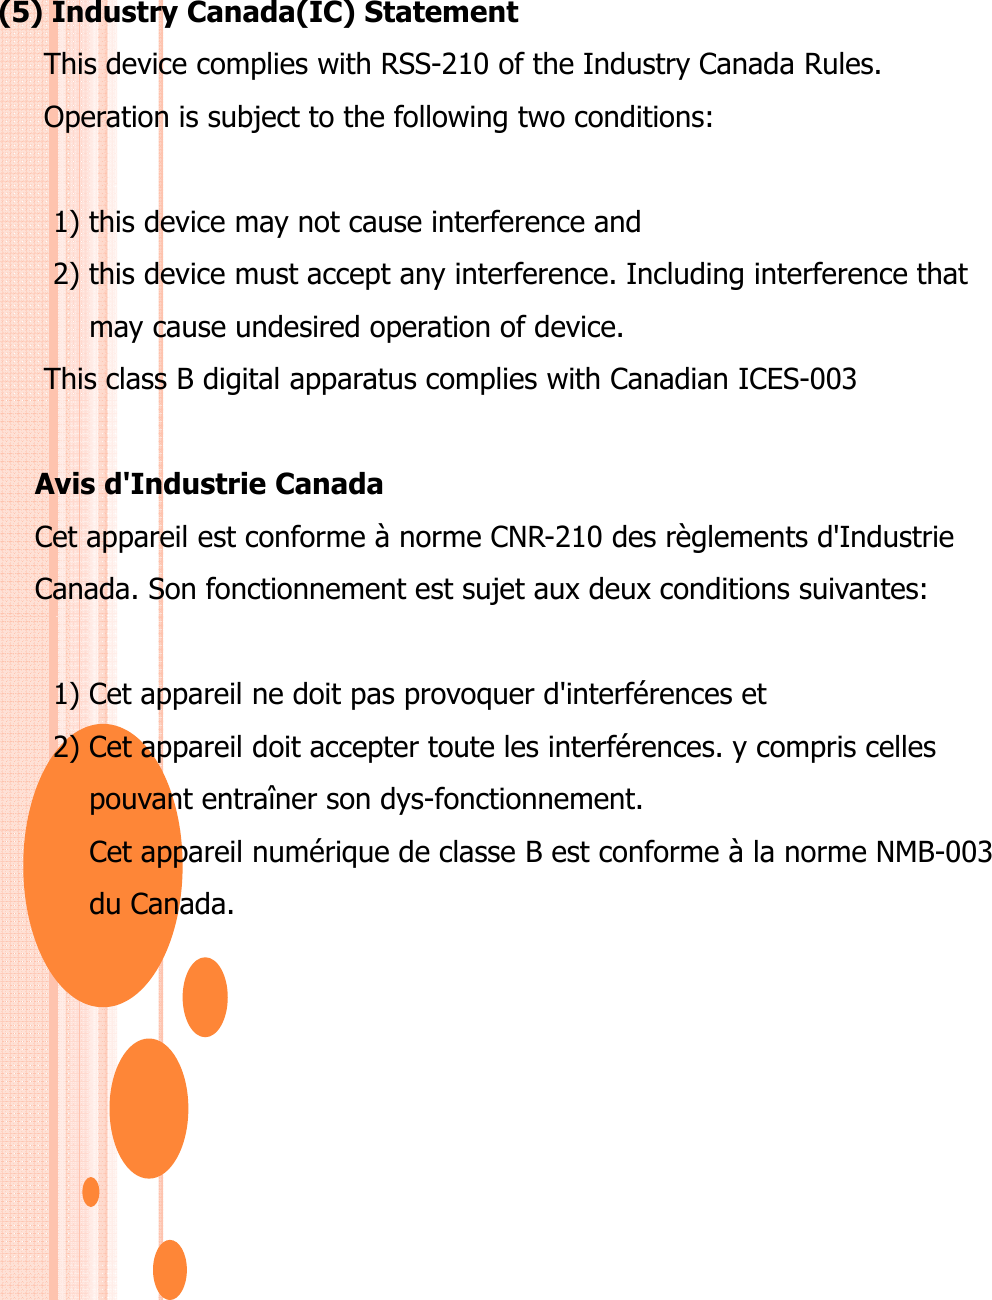 (5) Industry Canada(IC) StatementThis device complies with RSS-210 of the Industry Canada Rules.Operation is subject to the following two conditions:1) this device may not cause interference and2) this device must accept any interference. Including interference that  may cause undesired operation of device.This class B digital apparatus complies with Canadian ICES-003Avis d&apos;Industrie CanadaCet appareil est conforme à norme CNR-210 des règlements d&apos;Industrie  Canada. Son fonctionnement est sujet aux deux conditions suivantes:1) Cet appareil ne doit pas provoquer d&apos;interférences et2) Cet appareil doit accepter toute les interférences. y compris celles pouvant entraîner son dys-fonctionnement.Cet appareil numérique de classe B est conforme à la norme NMB-003 du Canada.